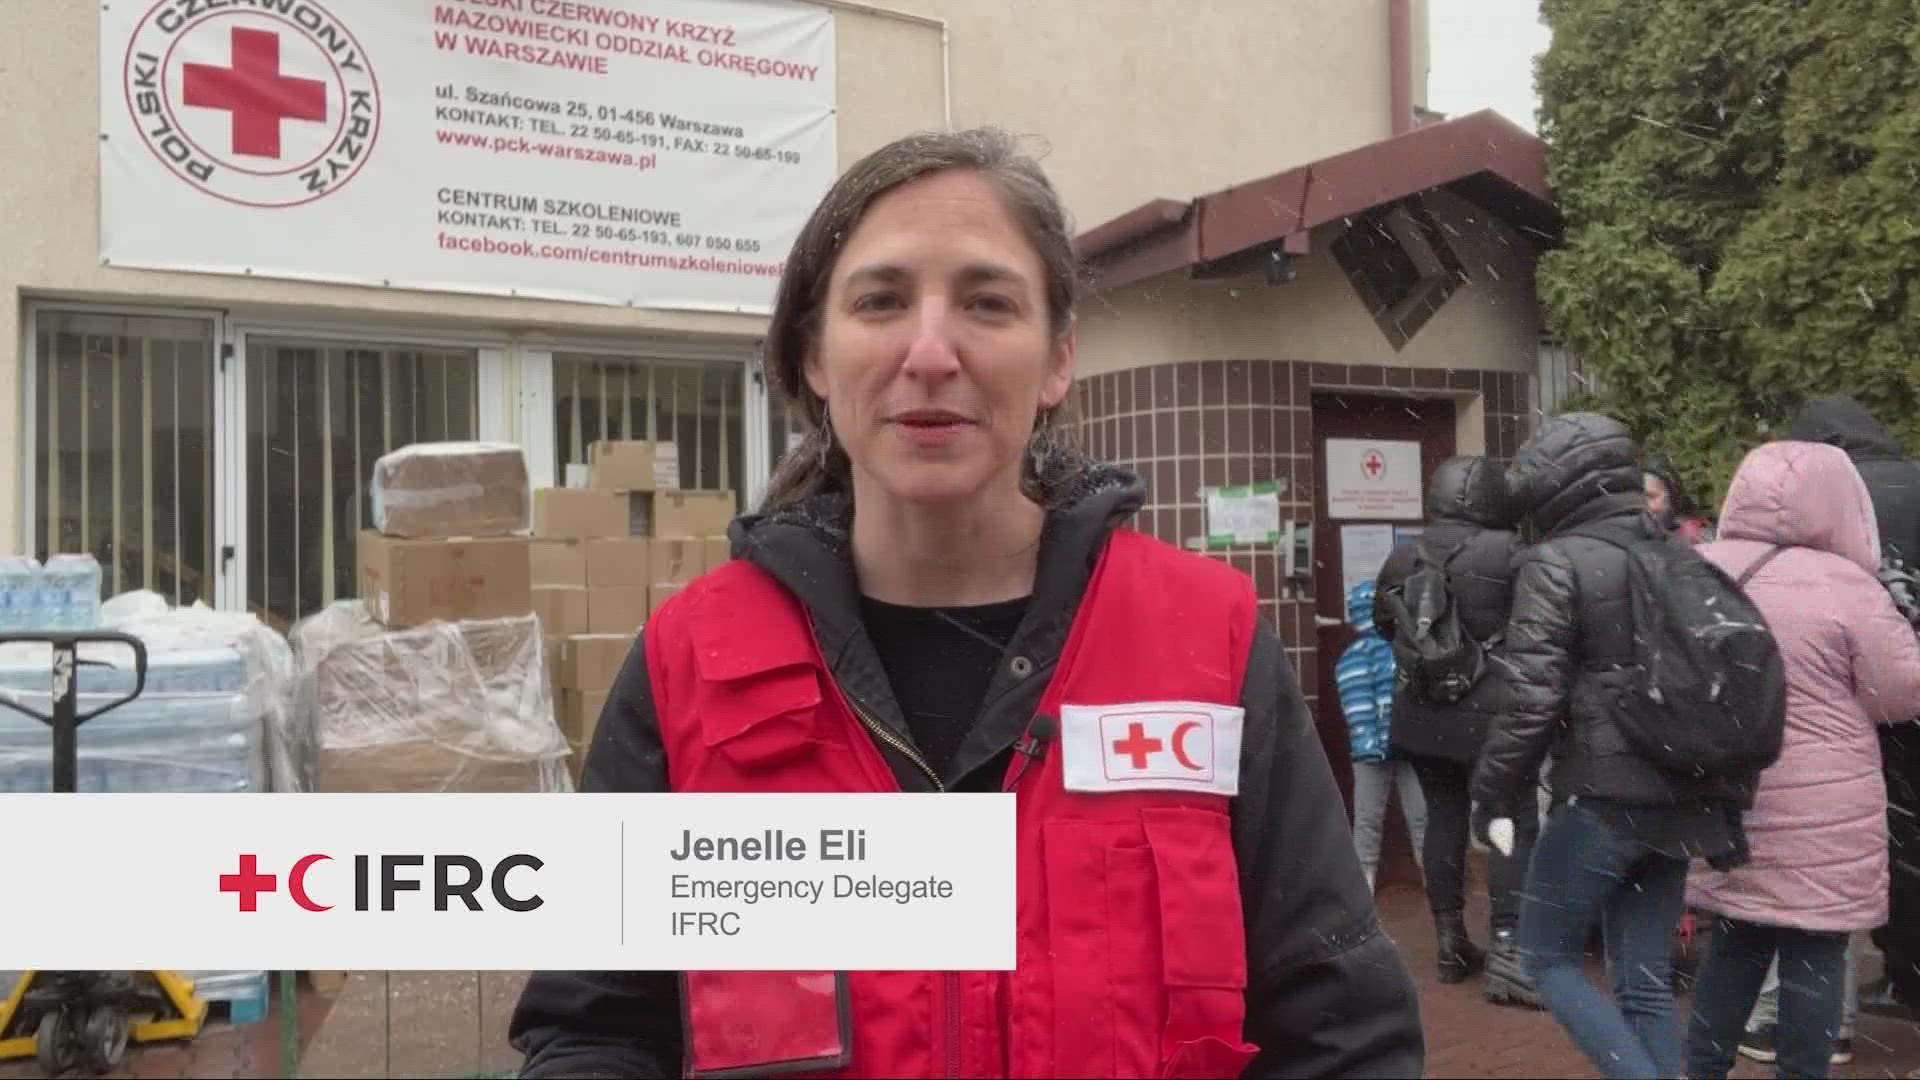 A Northeast Ohio native who works with the Red Cross is now on the ground in Poland. She told our Sara Shookman what she's seeing.